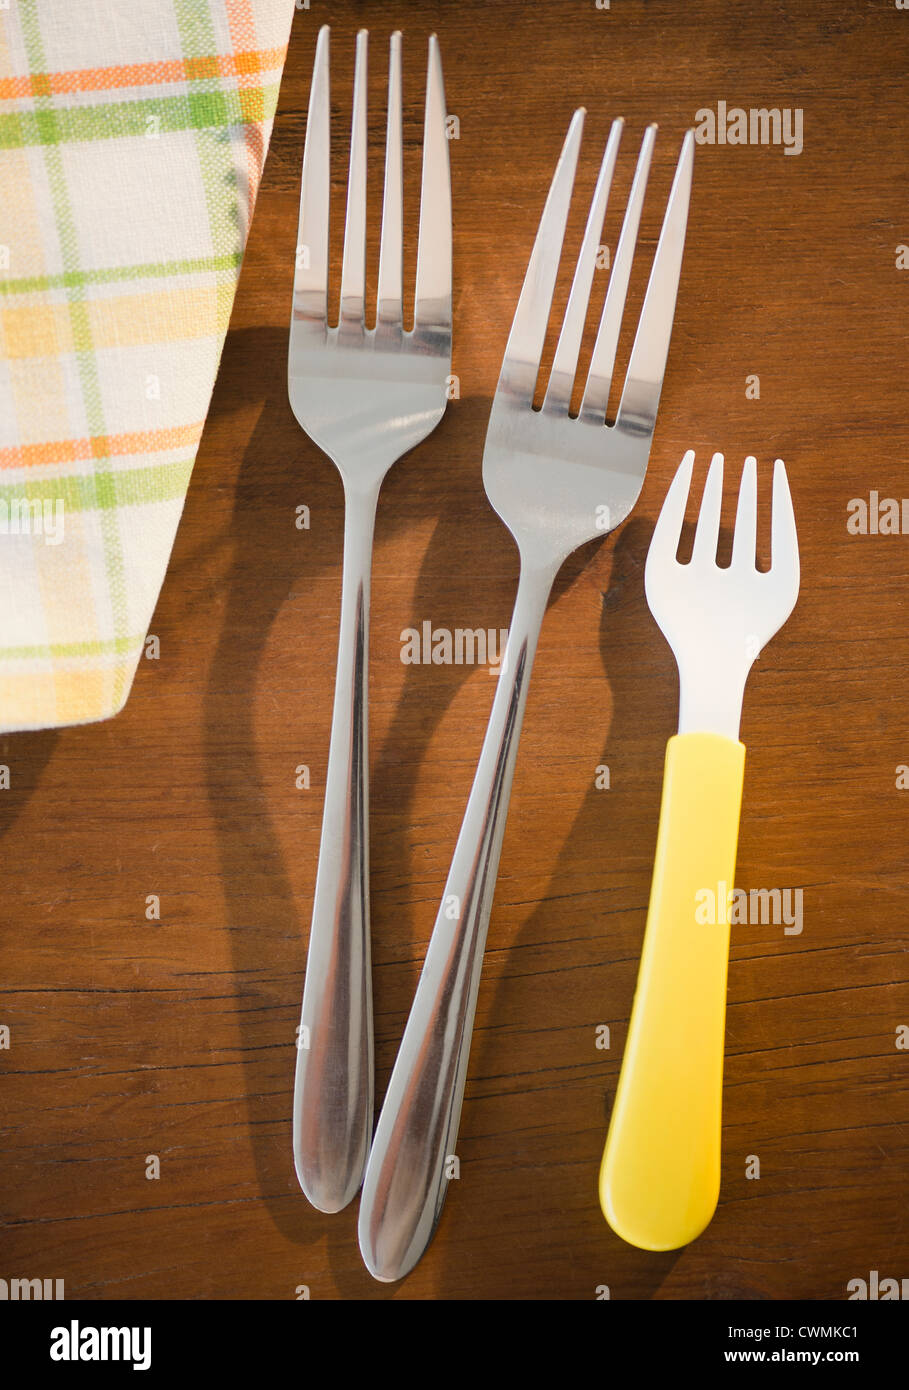 Forks on table Stock Photo